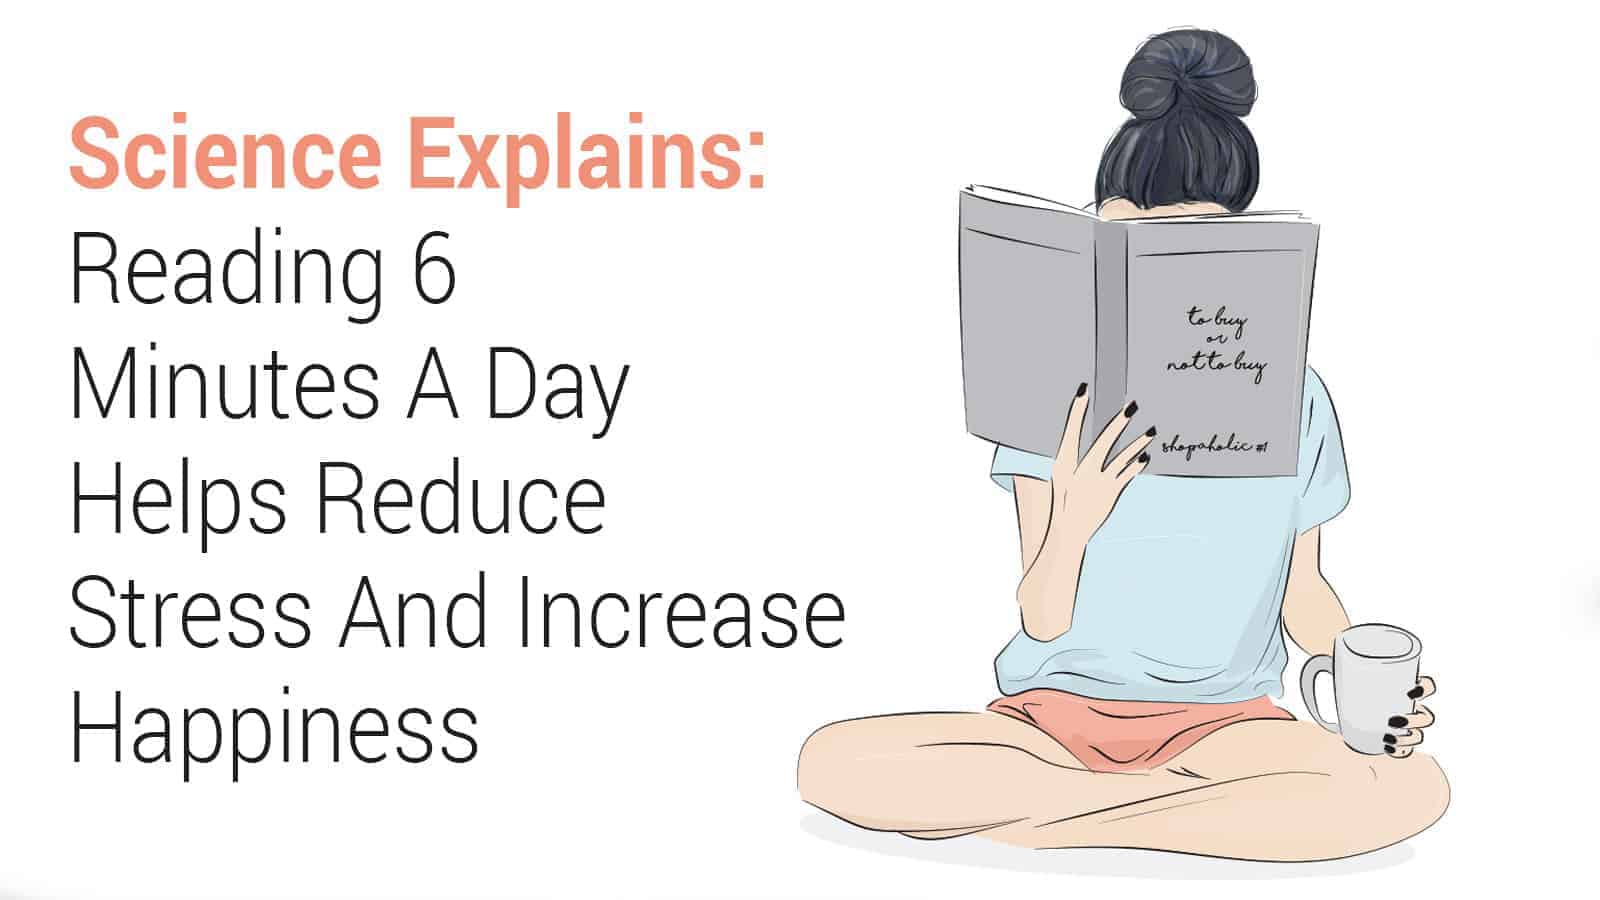 Science Explains: Reading 6 Minutes A Day Helps Reduce Stress And Increase Happiness